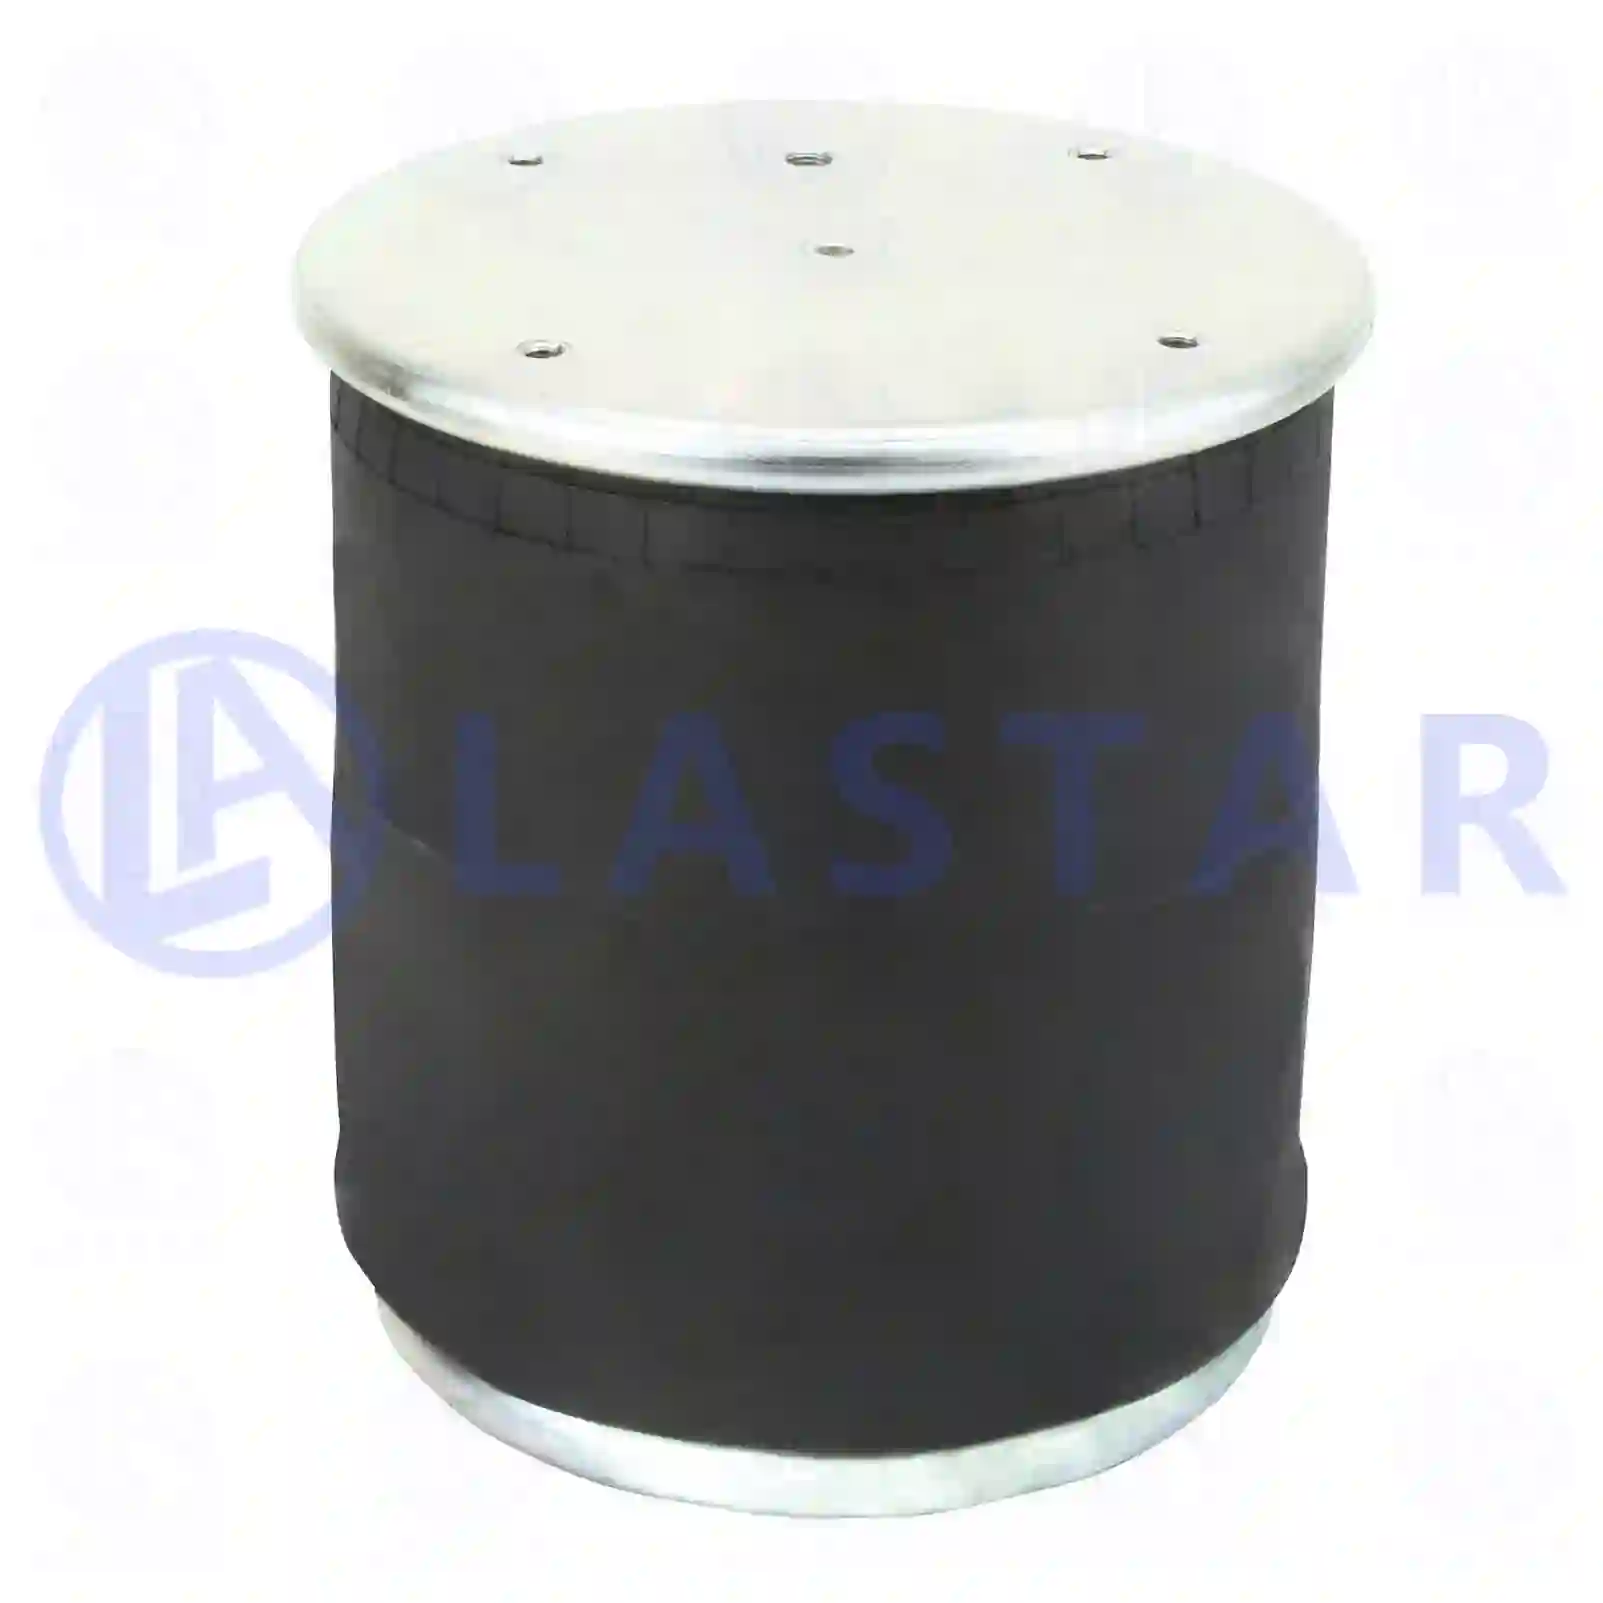 Air spring, with steel piston, 77727046, MLF7034, 3229000500, 1107674, 1314906, 1865755, 255293, 255295, 298568, 325748, 328748, 573581, ZG40733-0008 ||  77727046 Lastar Spare Part | Truck Spare Parts, Auotomotive Spare Parts Air spring, with steel piston, 77727046, MLF7034, 3229000500, 1107674, 1314906, 1865755, 255293, 255295, 298568, 325748, 328748, 573581, ZG40733-0008 ||  77727046 Lastar Spare Part | Truck Spare Parts, Auotomotive Spare Parts